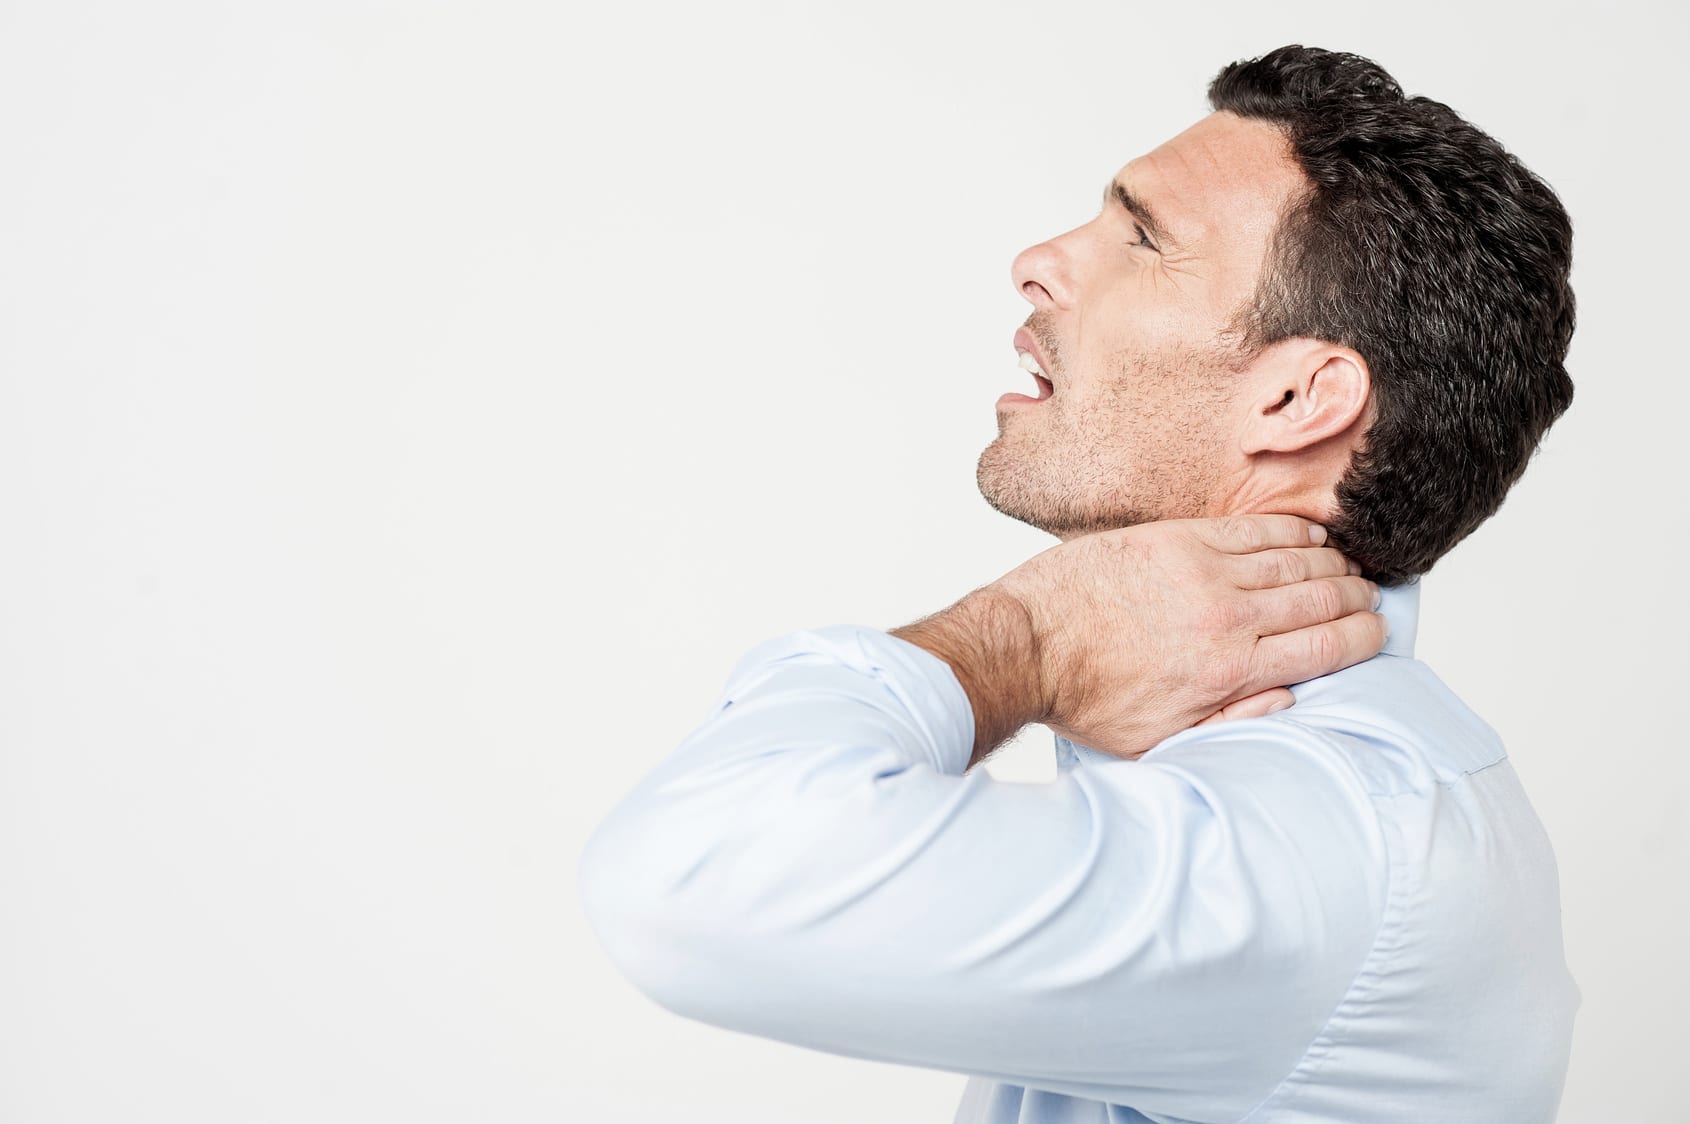 5 Easy Neck Pain Treatment Tips Spine Center of Texas